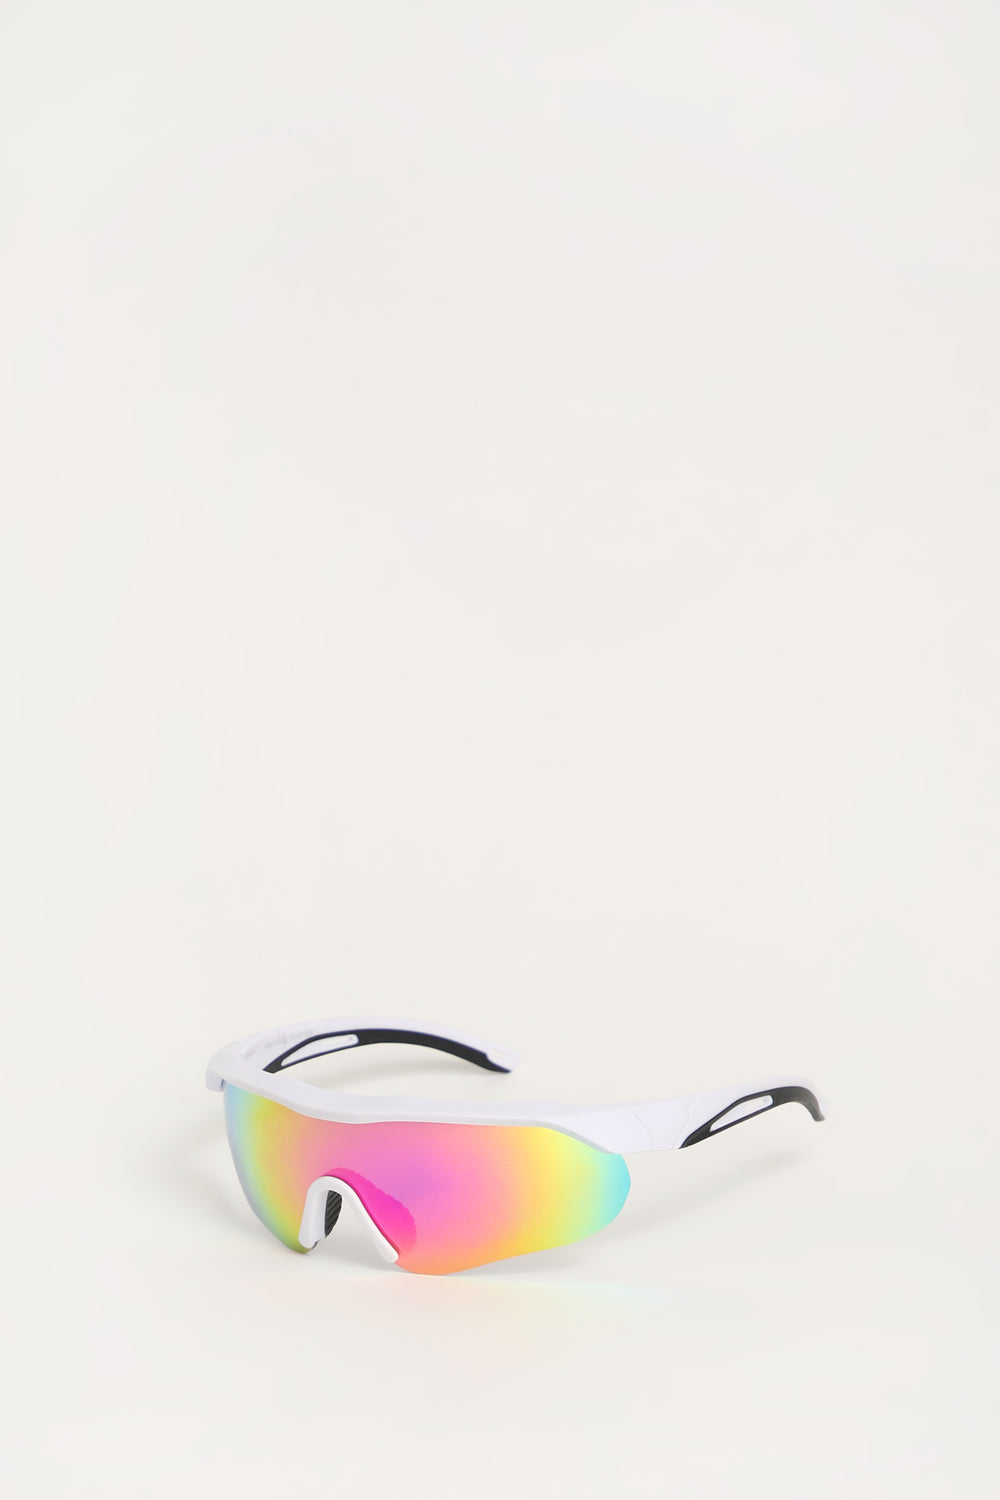 West49 Sport Wrapped Sunglasses West49 Sport Wrapped Sunglasses